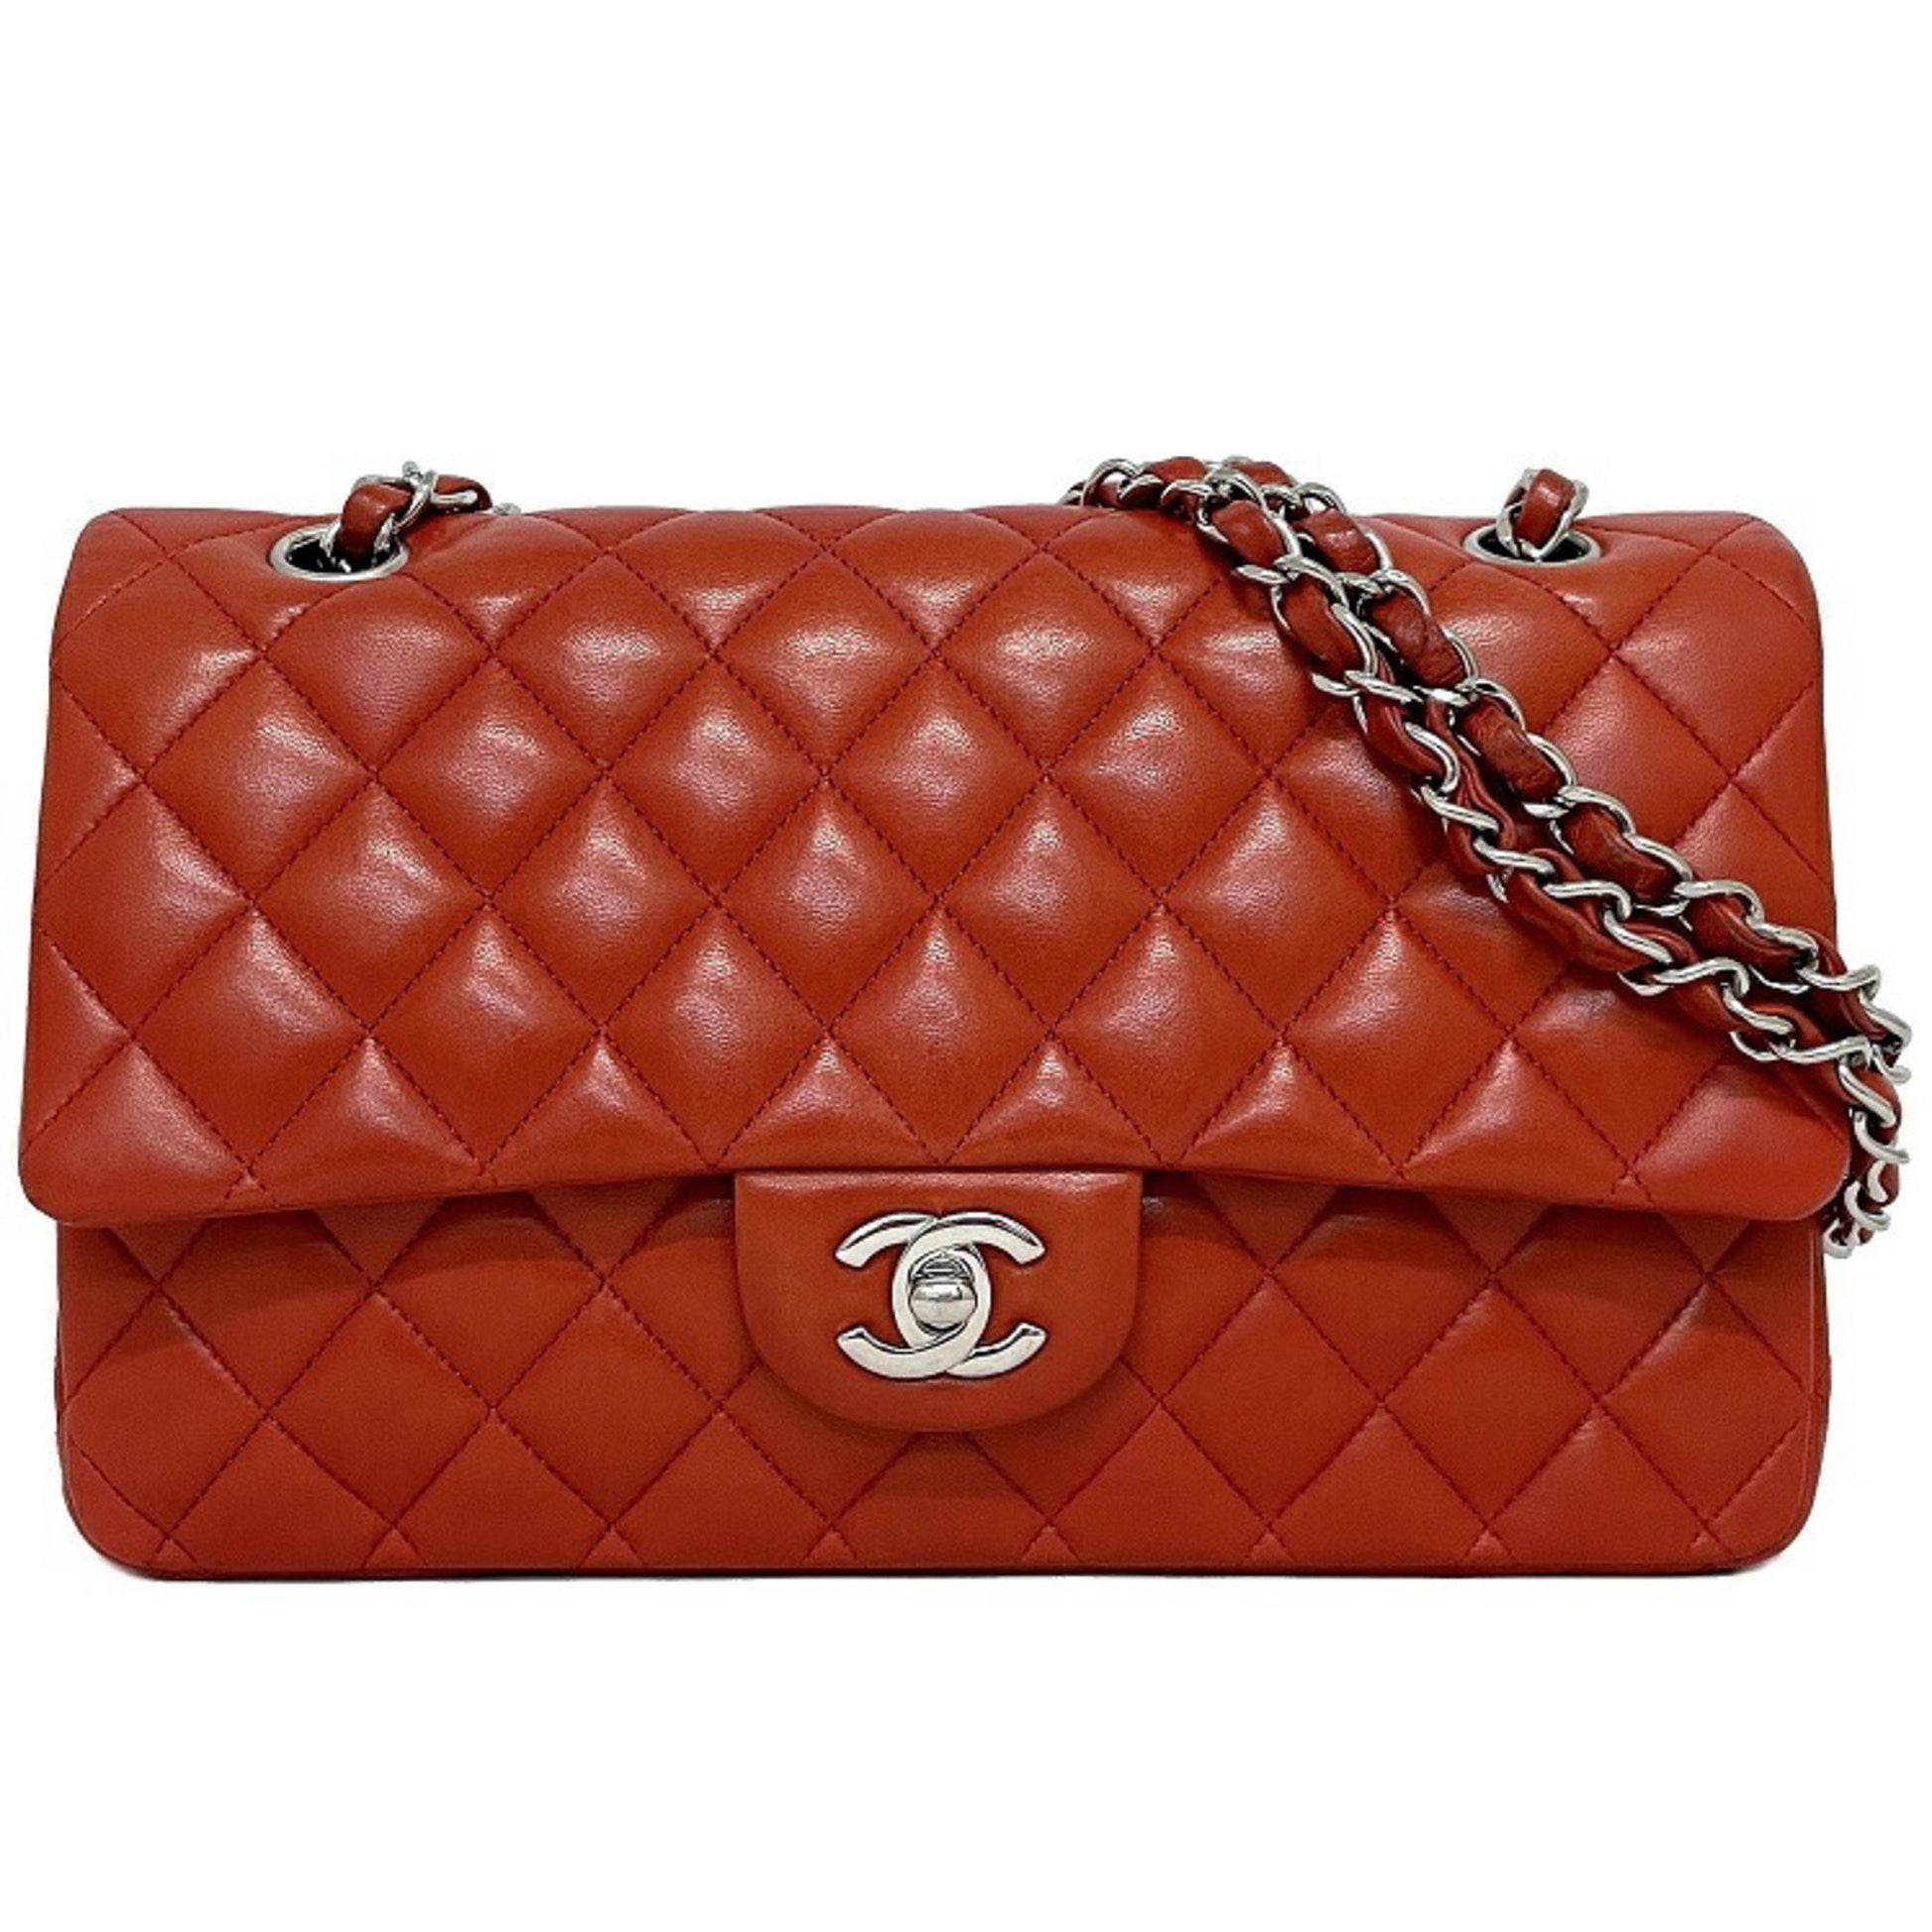 Chanel Chain Shoulder Bag 25 Red Matrasse A01112 W Flap Leather Lambsk